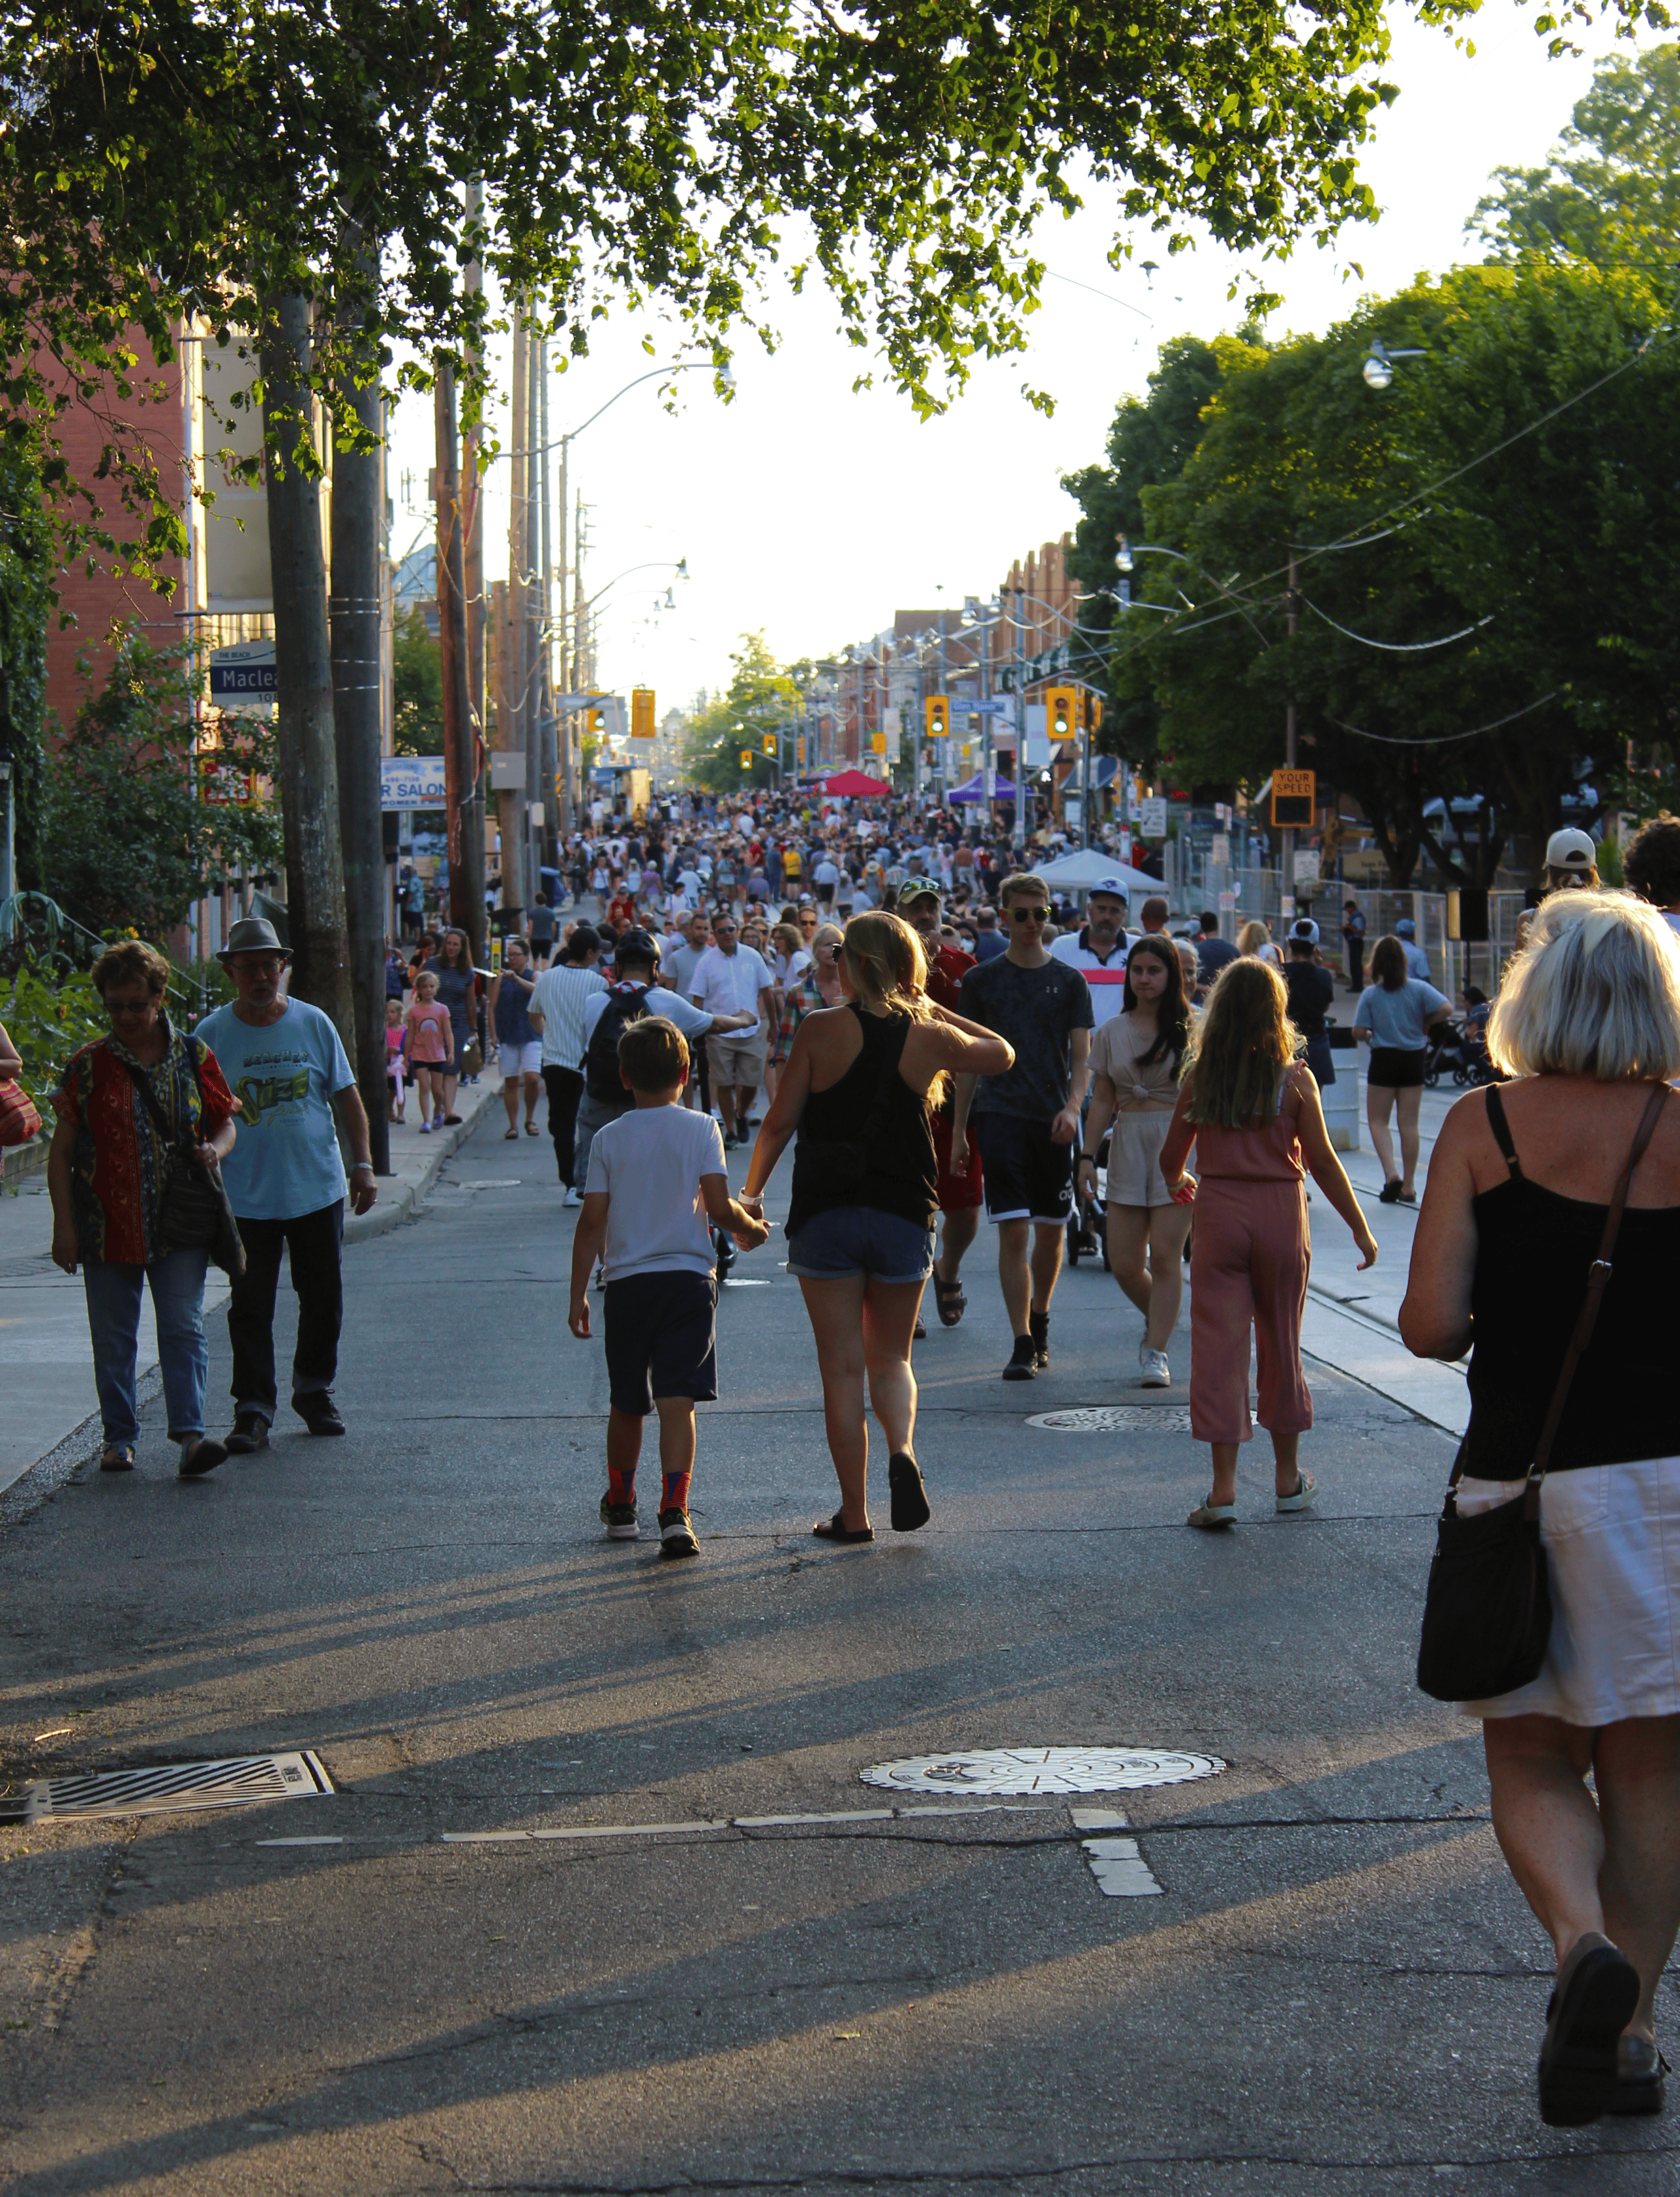 The crowds at StreetFest